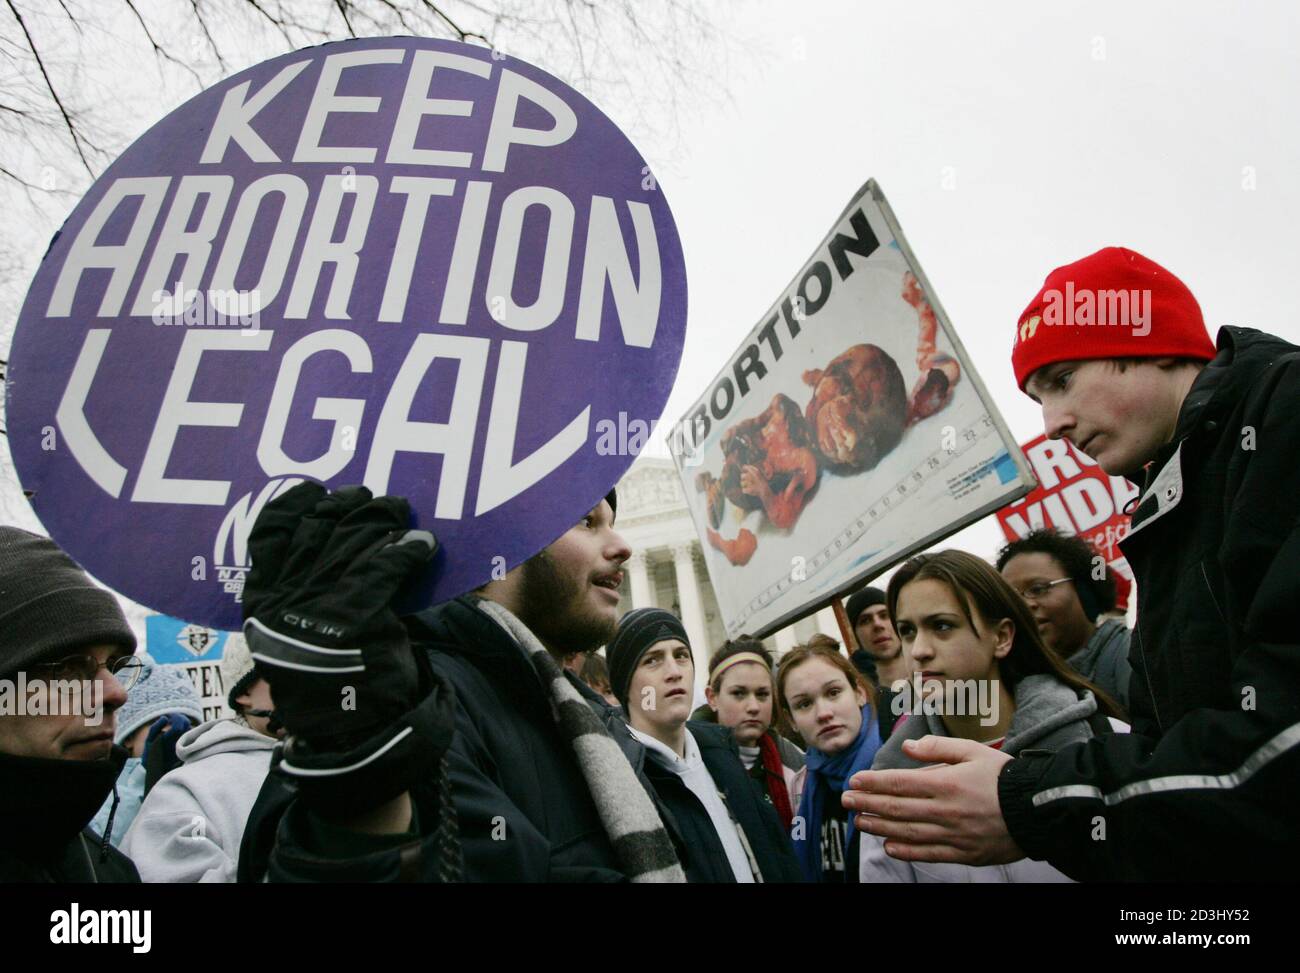 Pro-choice activist Luqman Clark (L), of Arlington, VA, argues with a group of anti-abortion protestors outside the U.S. Supreme Court in Washington January 24, 2005, during the 32nd annual March For Life protest against the Supreme Court's decision in the Roe v. Wade abortion rights decision. Thousands of pro-life activists marched to the Supreme Court where they were met by a handful of pro-choice campaigners. REUTERS/Jason Reed  JIR Stock Photo